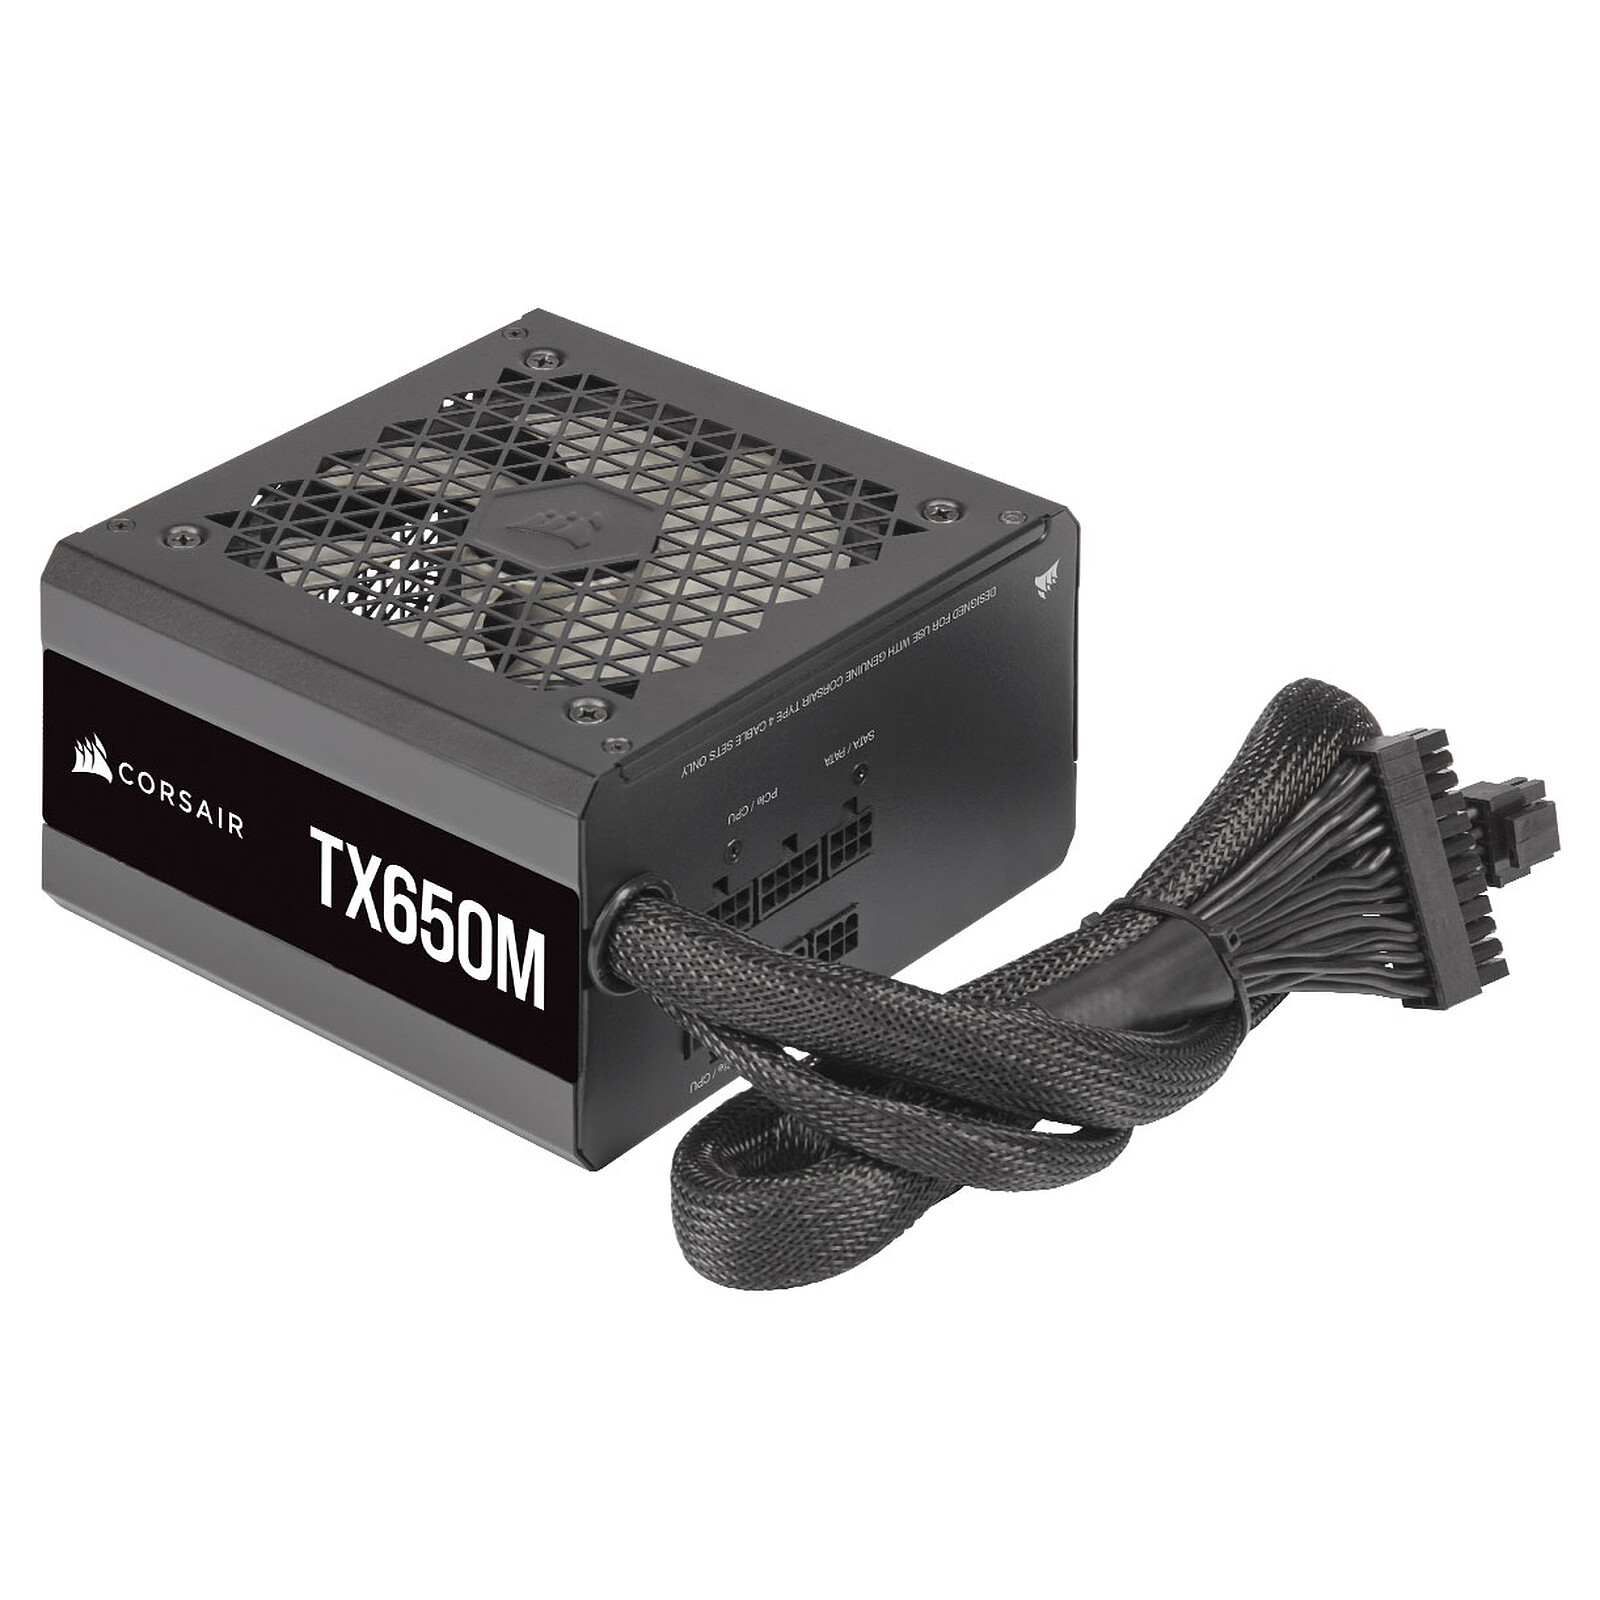 uafhængigt Efterforskning Distrahere Corsair TX650M 80 PLUS Gold (2021) - PC power supply Corsair on LDLC | Holy  Moley